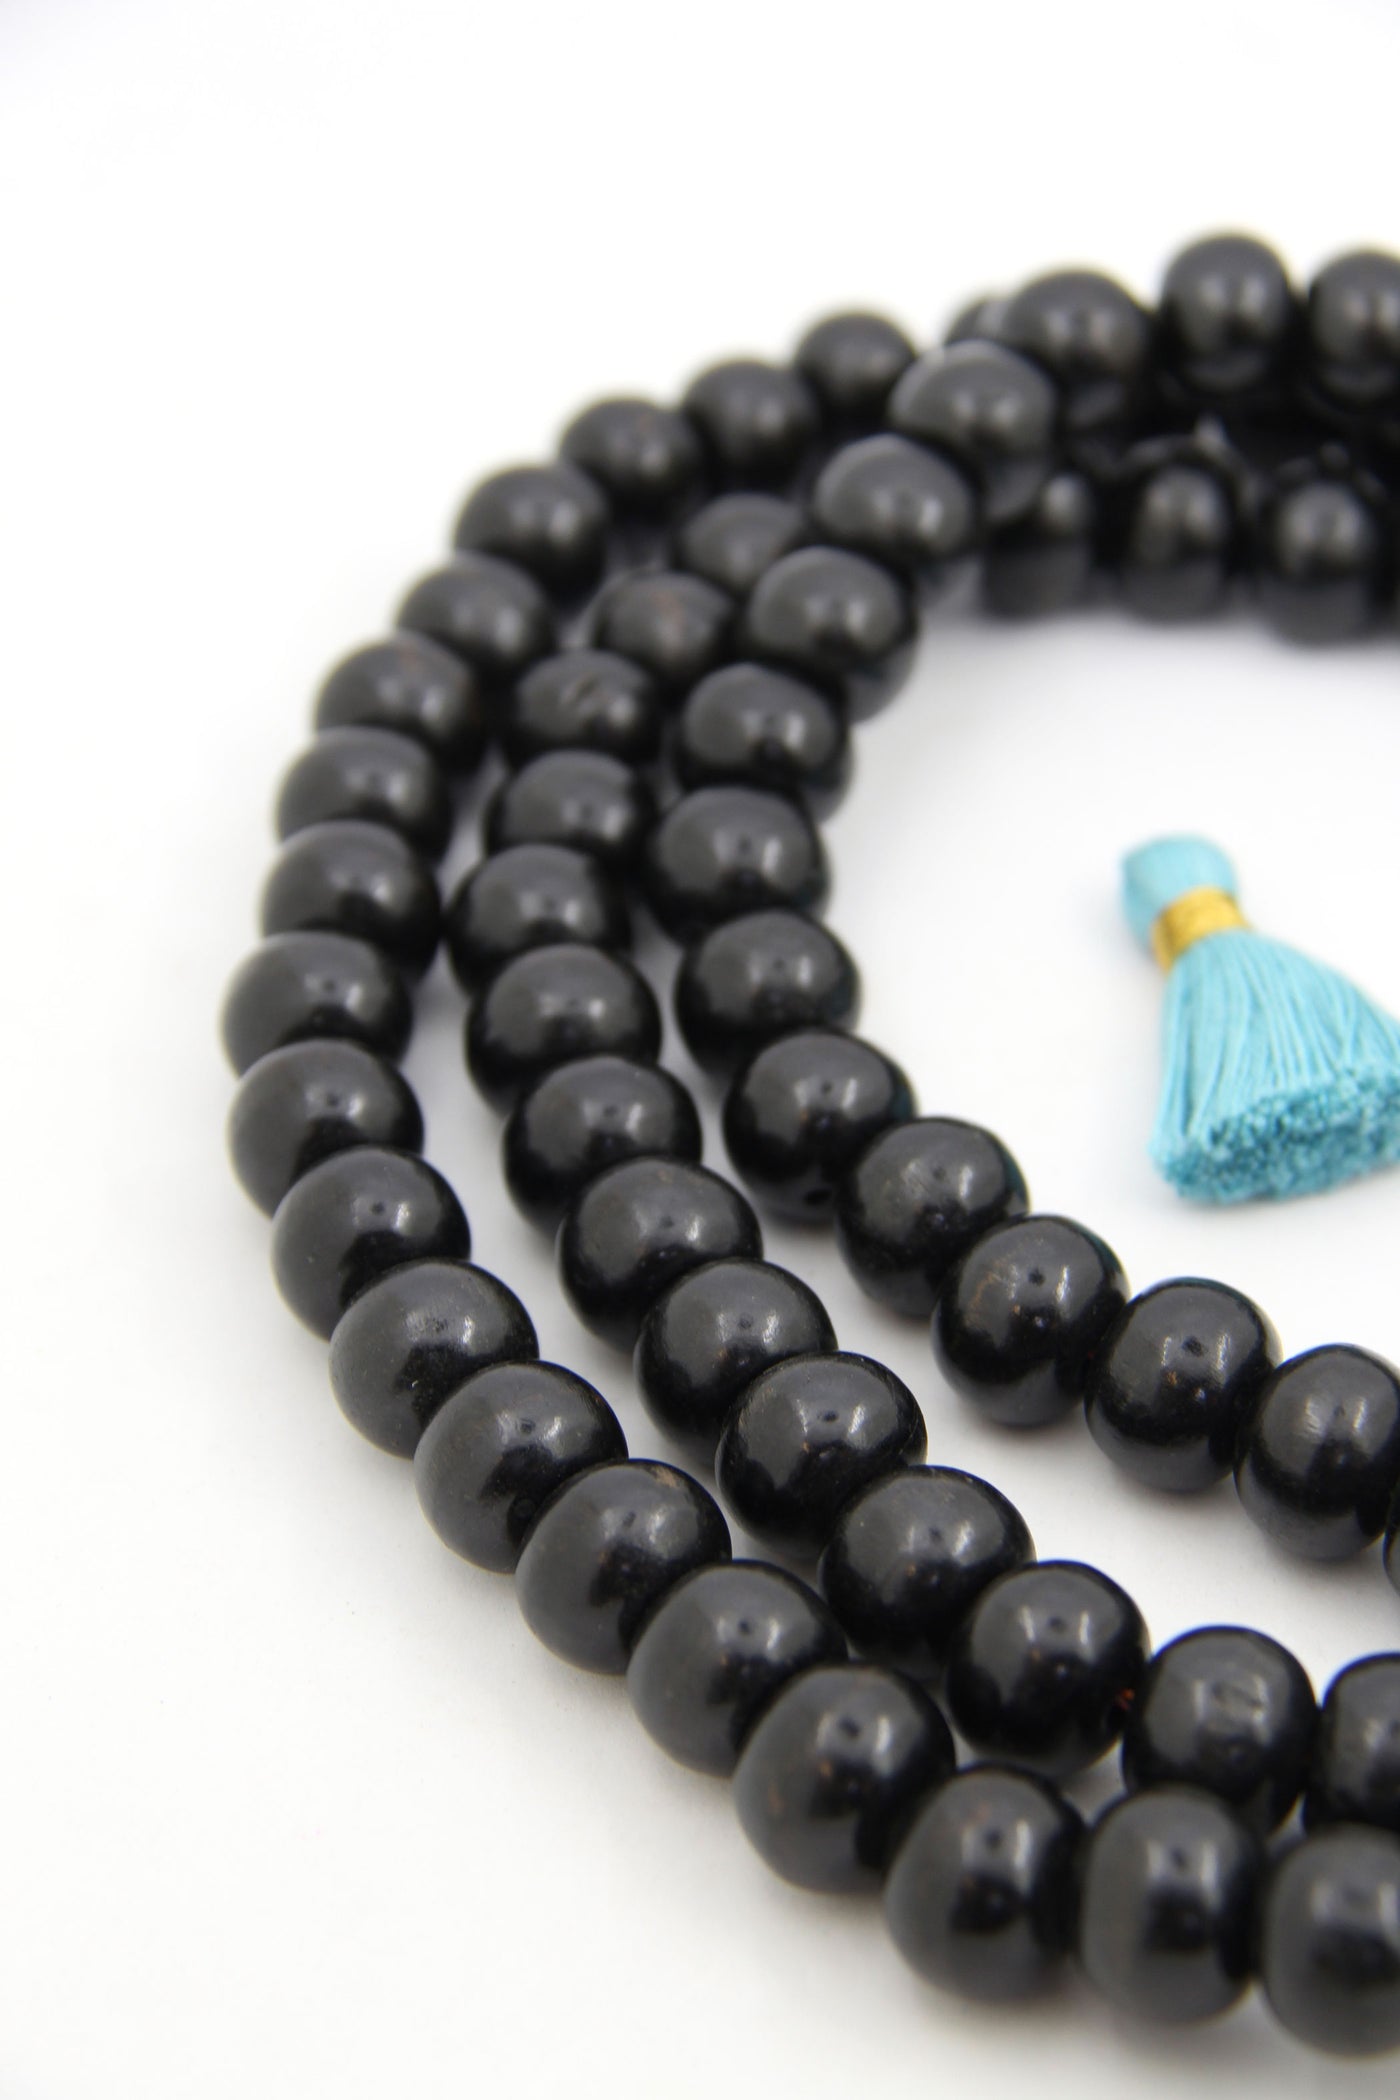 Black ebony wood petals - Beads and Pieces Wholesale Beads